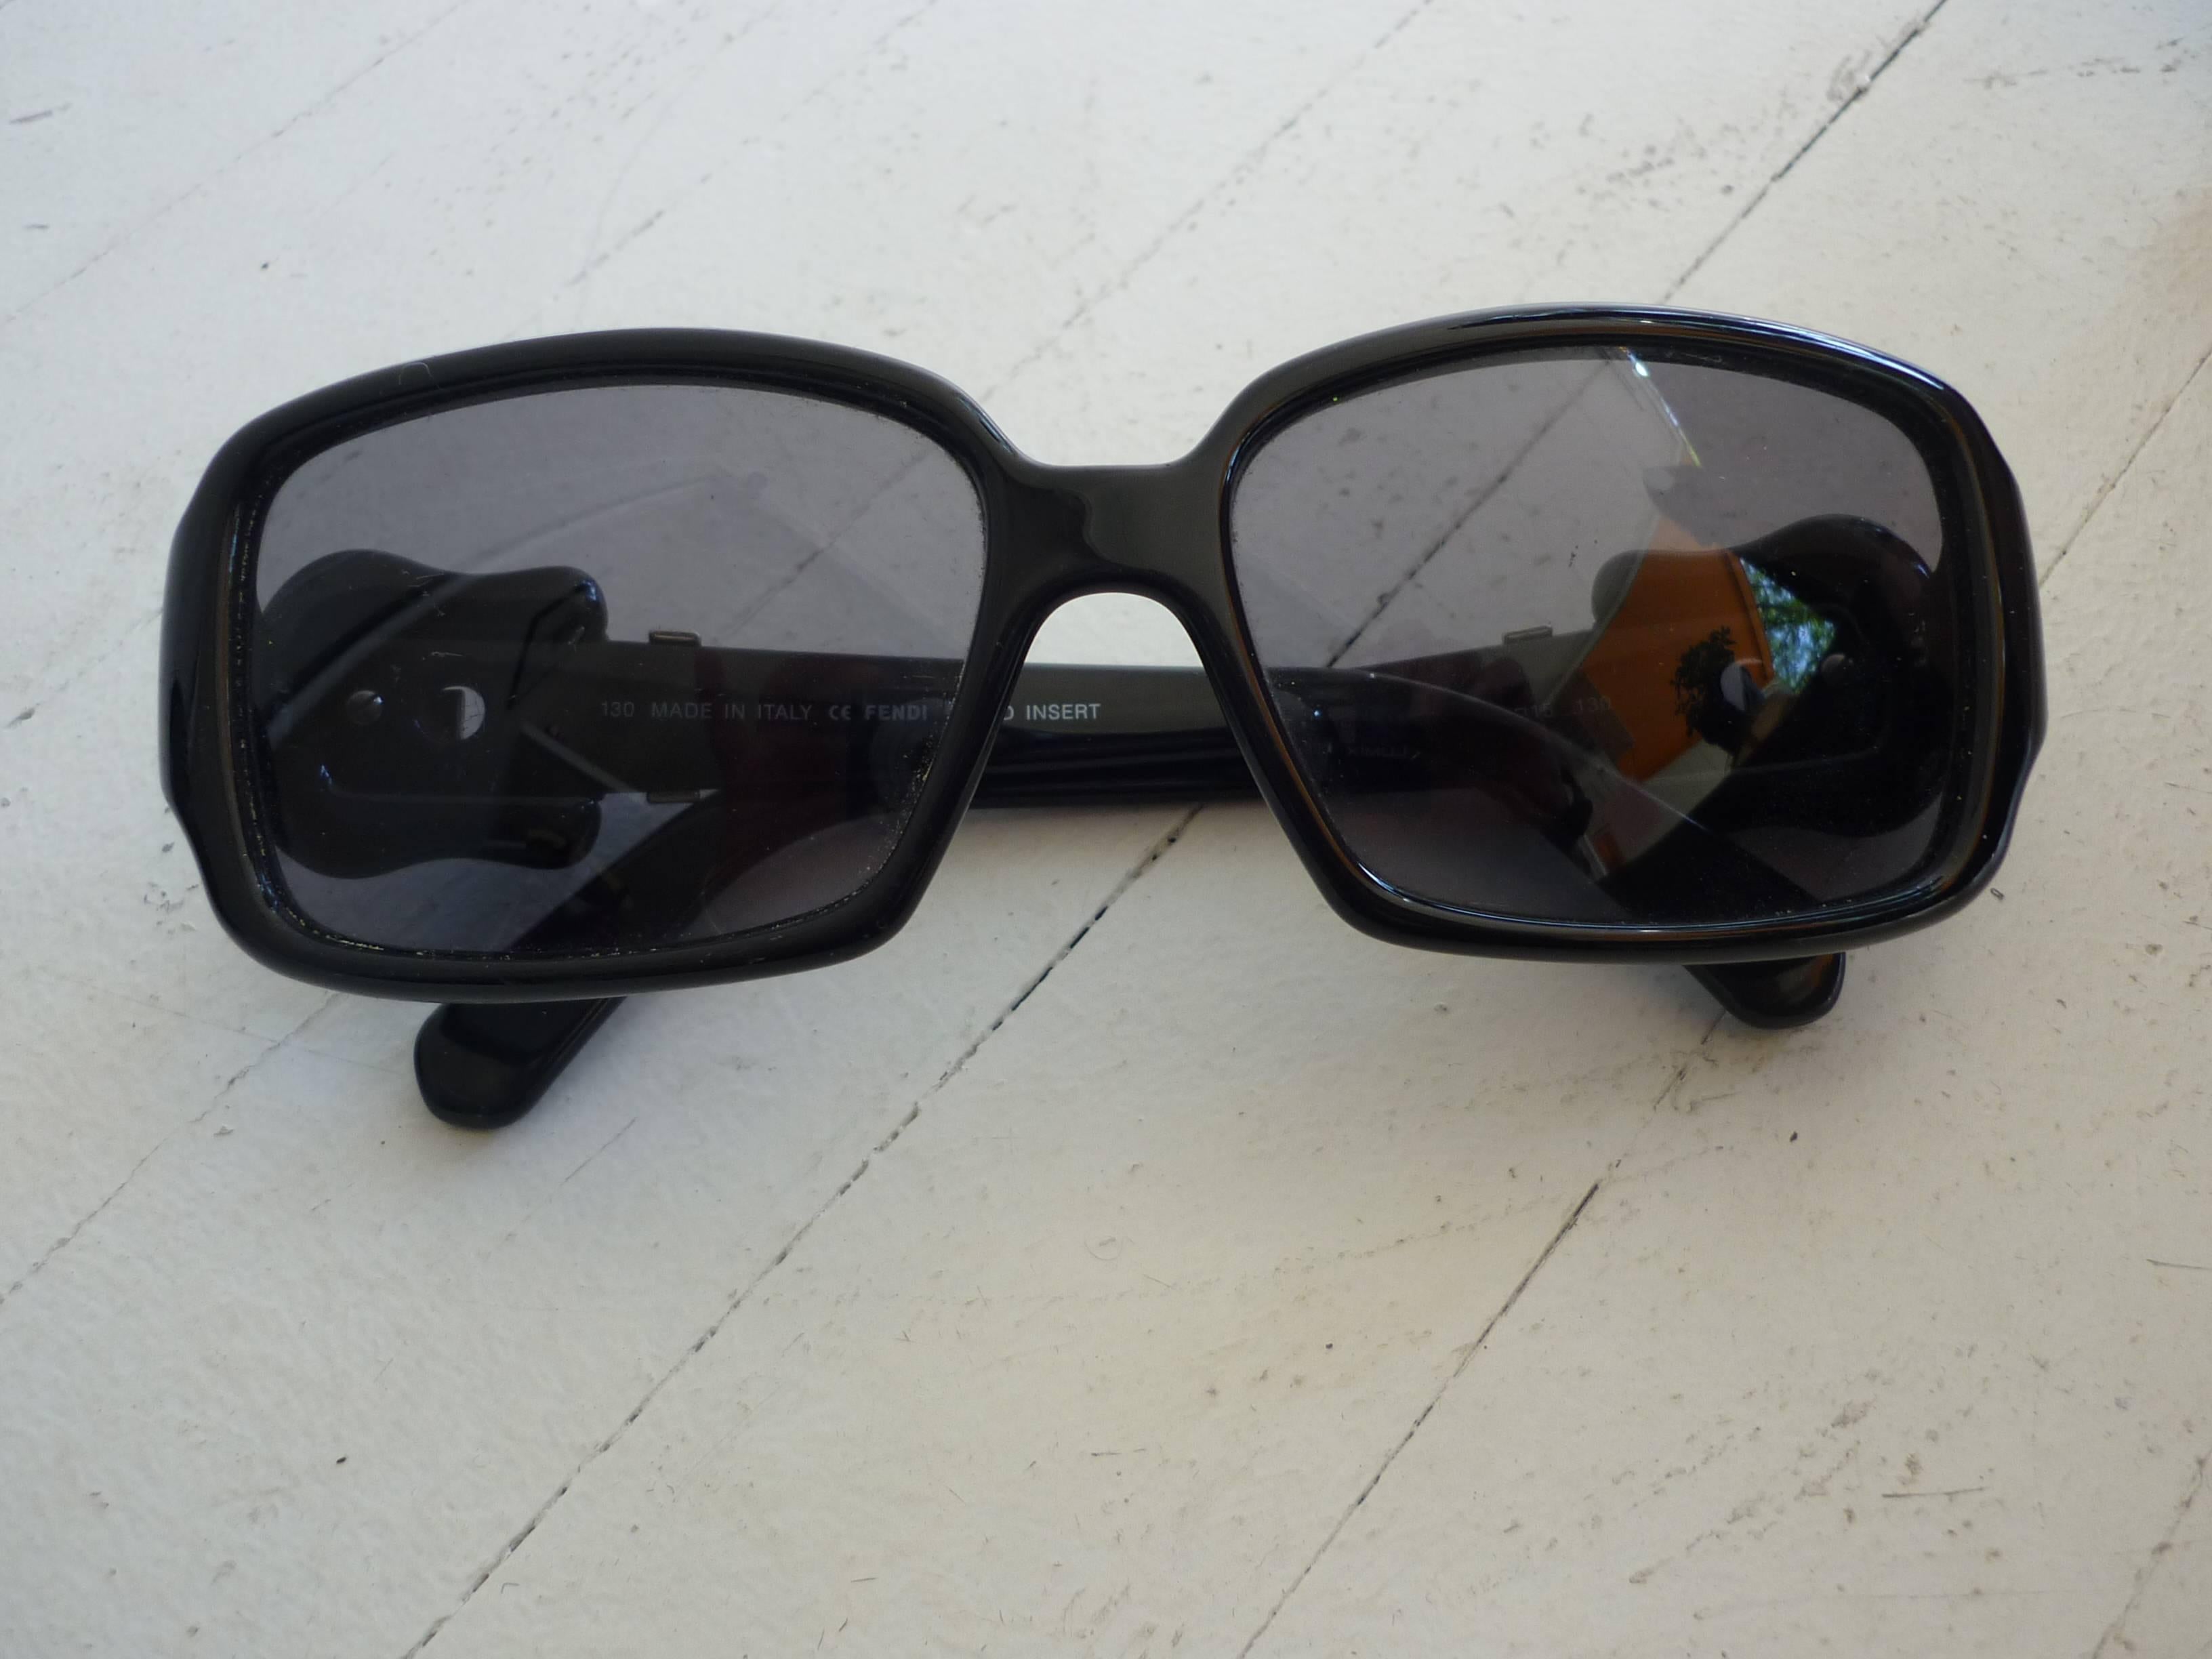 These sunglasses have an unusual belt pattern on the arms with gold embellishments. The frames are plastic and the lenses cold insert.

There are some light scratches on the lenses which is reflected in the price.